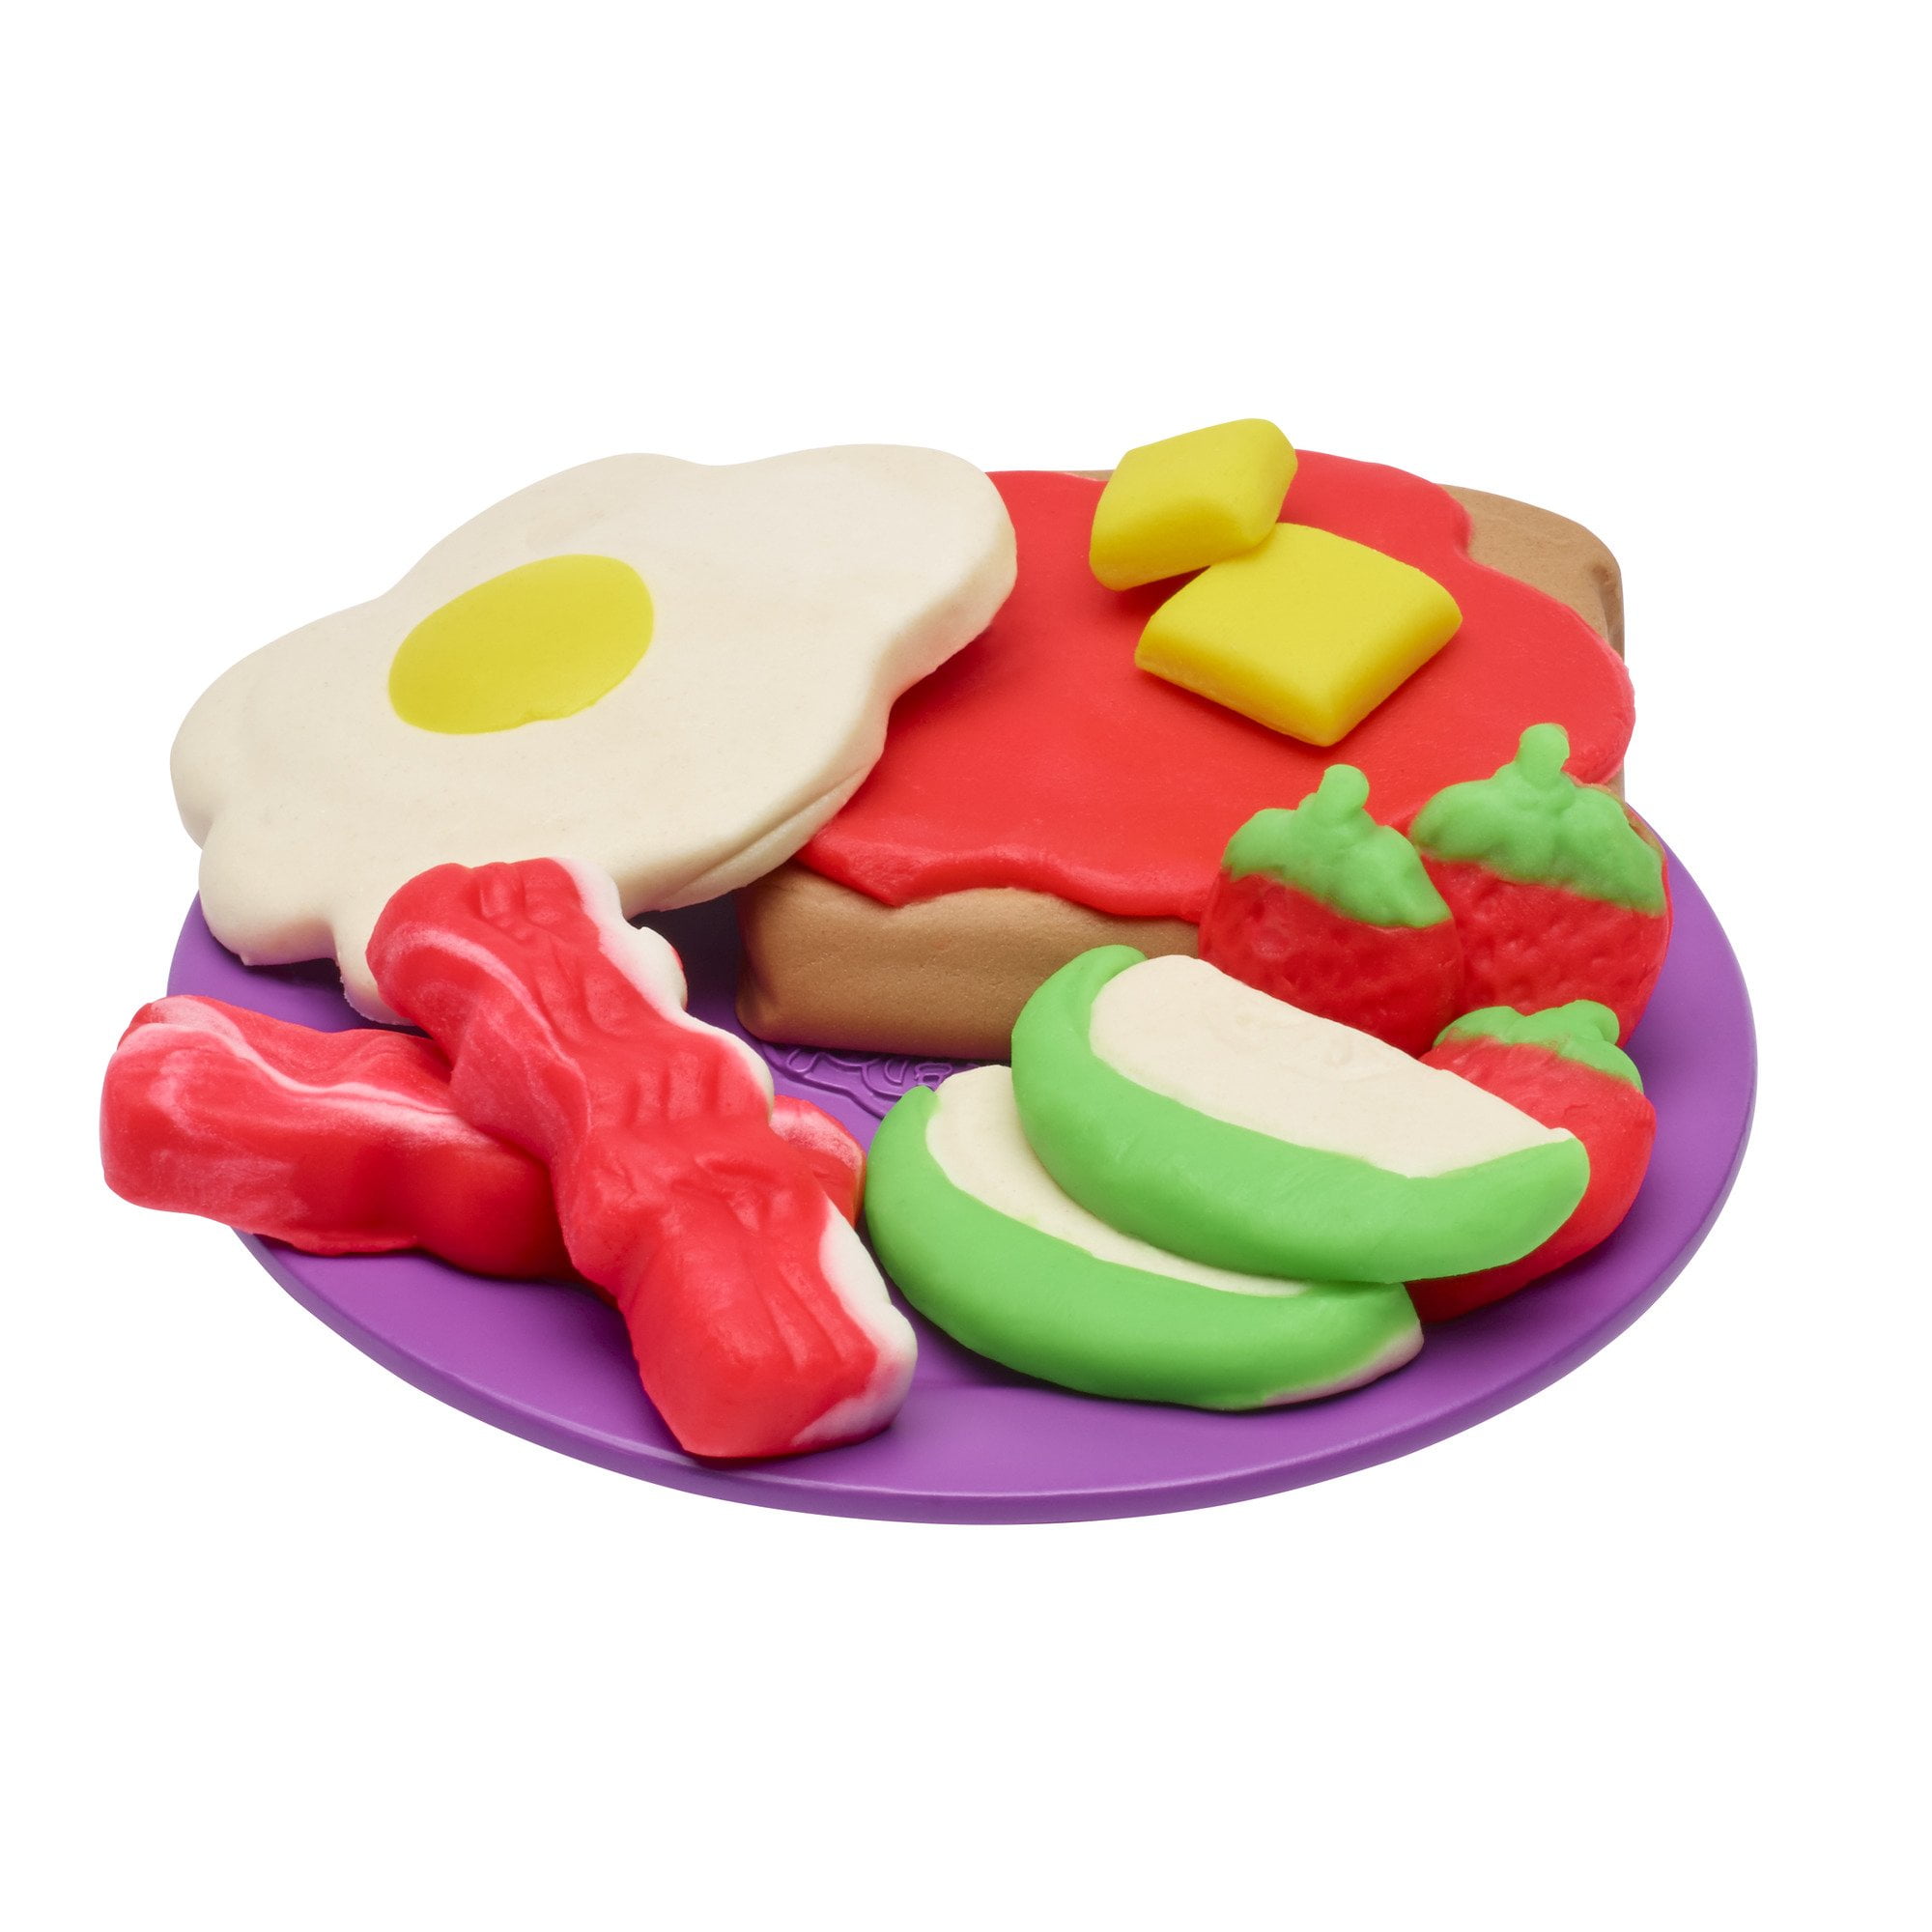 Play Doh Kitchen Creations Playset, Modeling Compound, Toaster Creations - 1 playset, 280 g